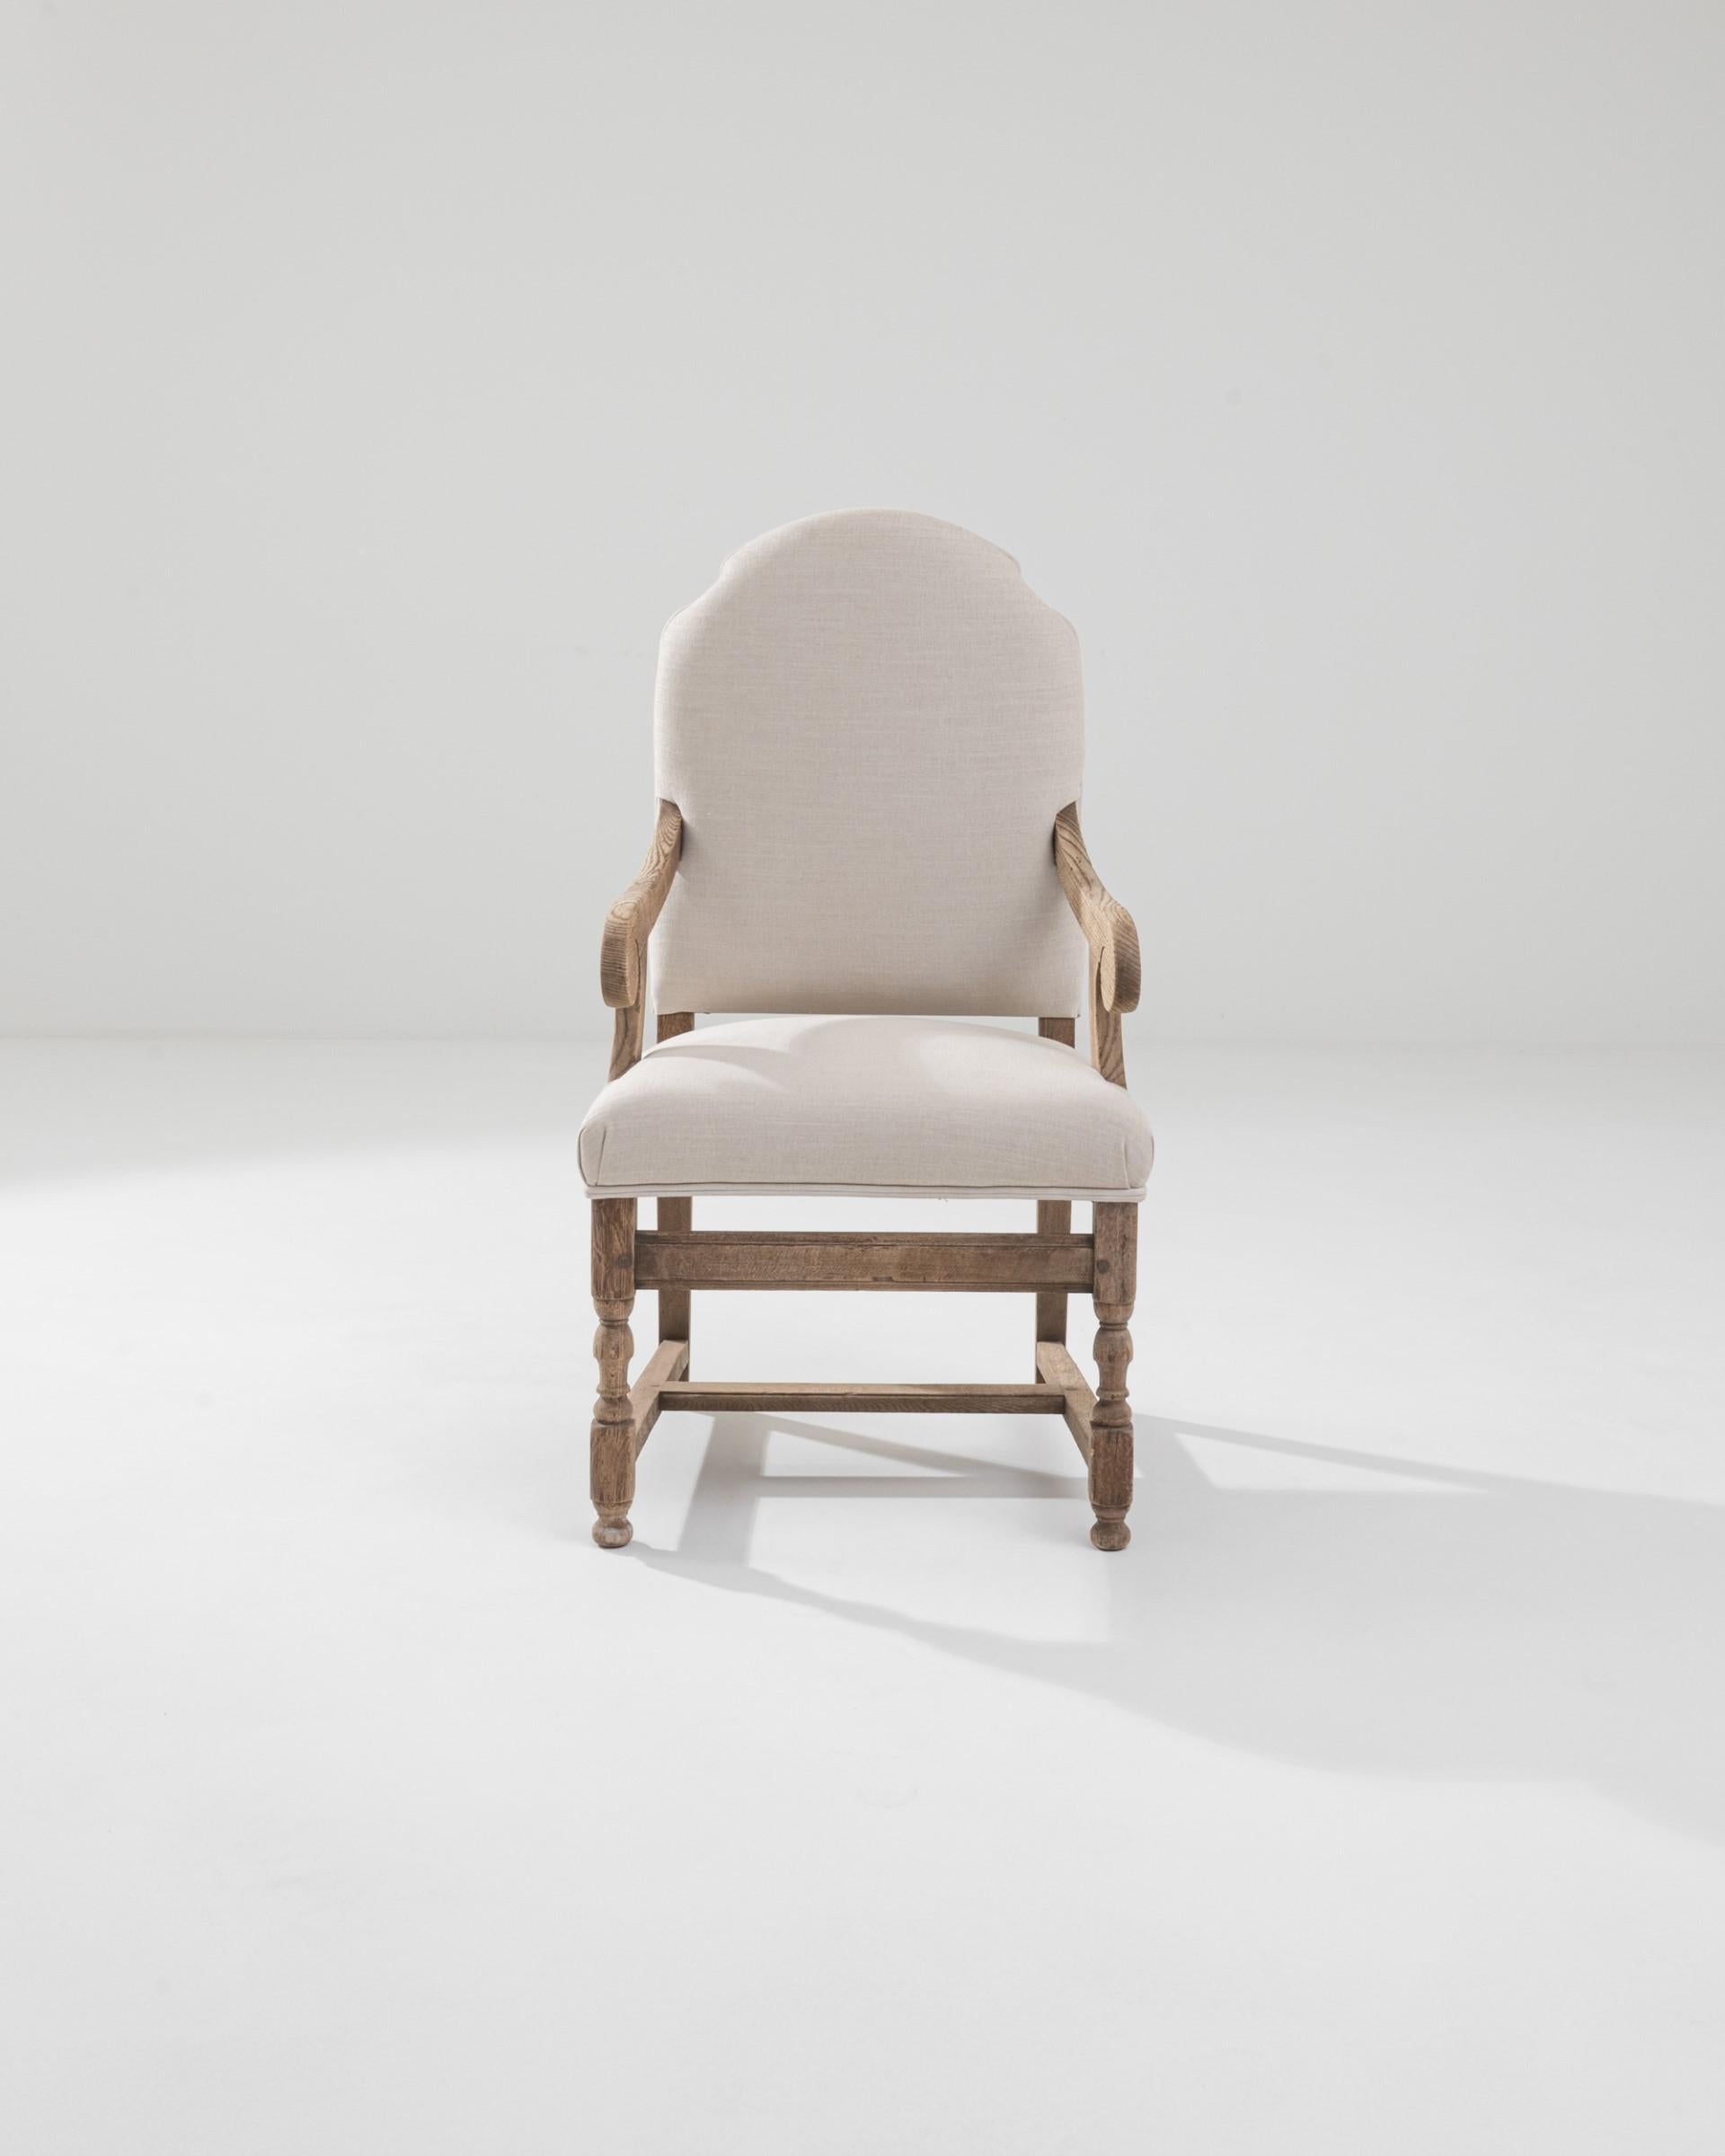 Thoughtfully reupholstered pair of bleach oak armchairs from 20th century France. Crafted from solid oak and expertly bleached to a soft, luminous patina, these armchairs bear the hallmark of French craftsmanship. The gentle curves and carved